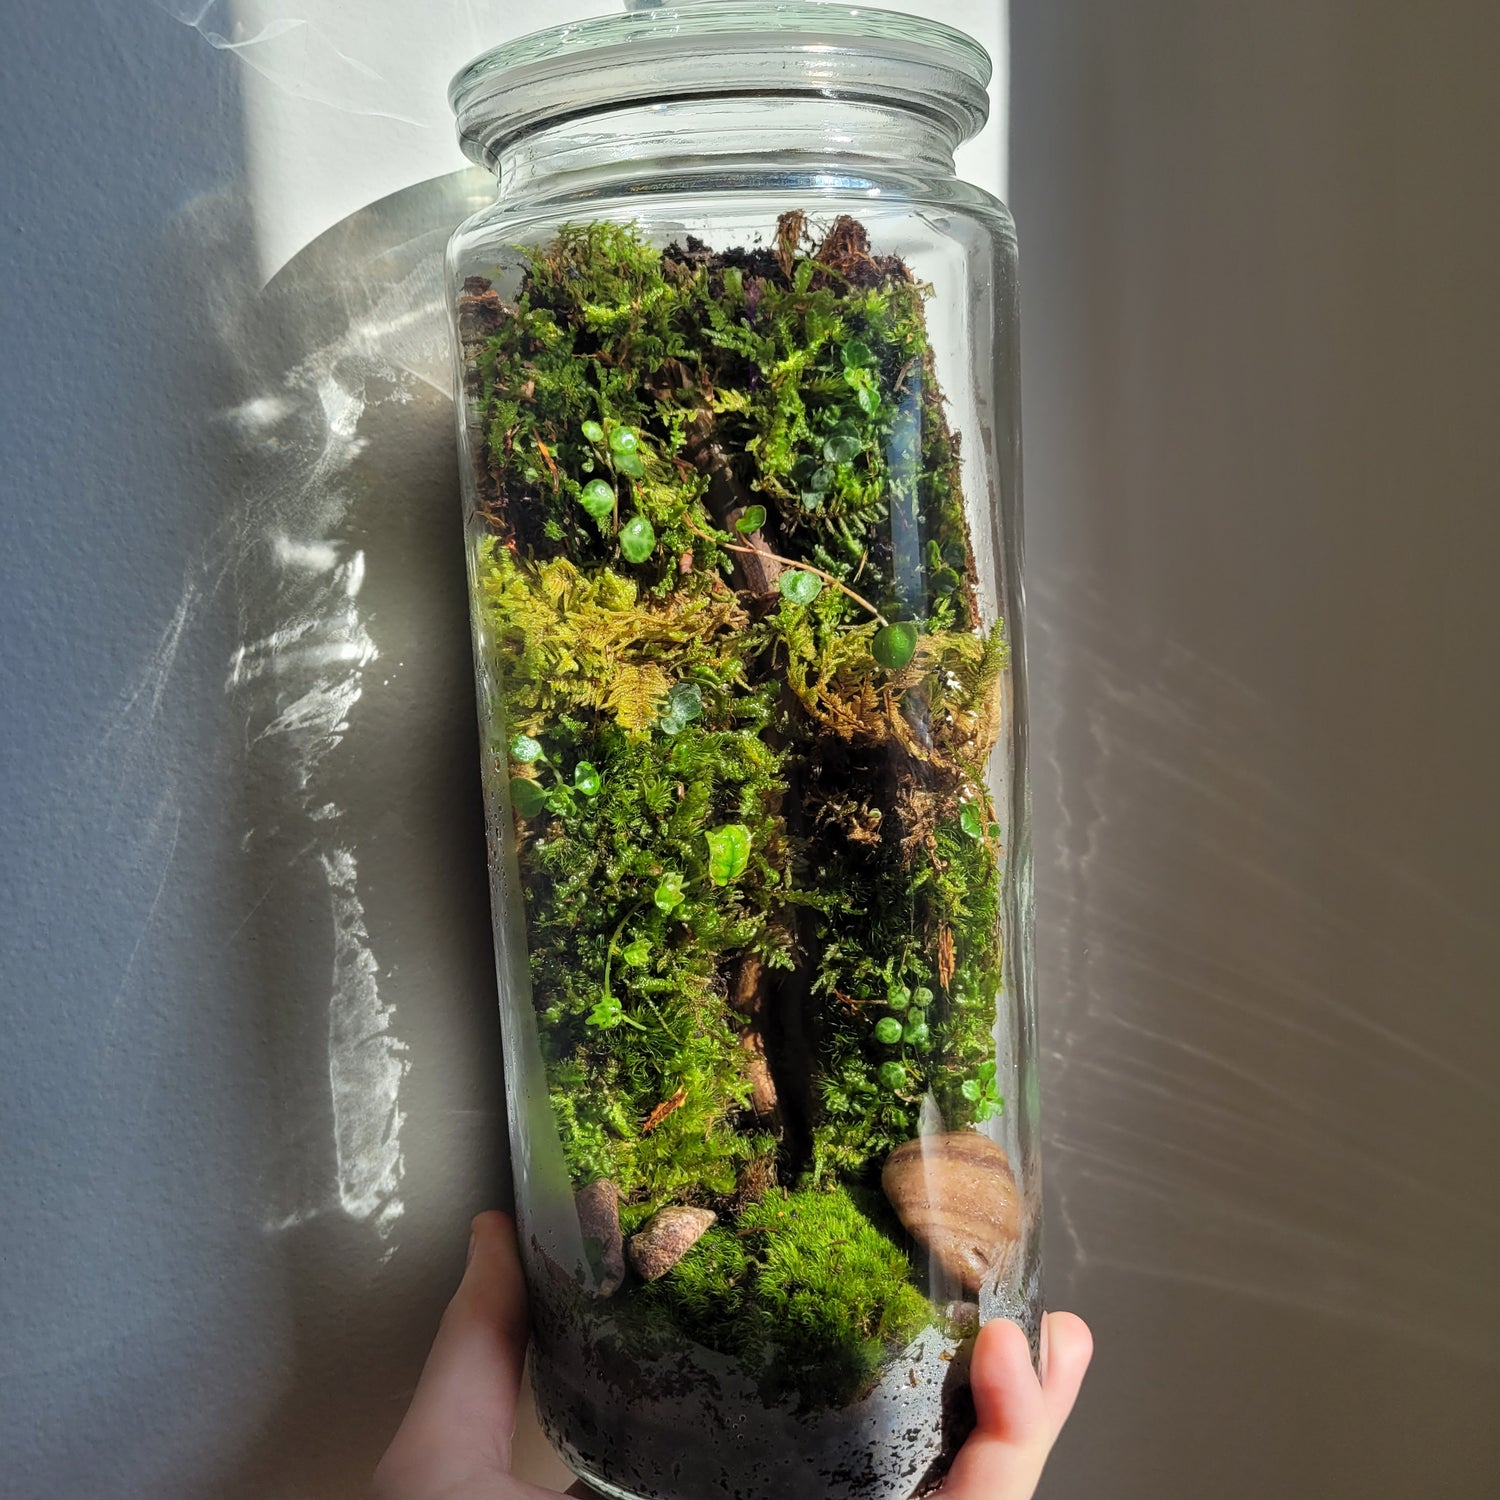 A vertical live moss wall terrarium with string of turtles and oak leaf fig plants is held against a white background.